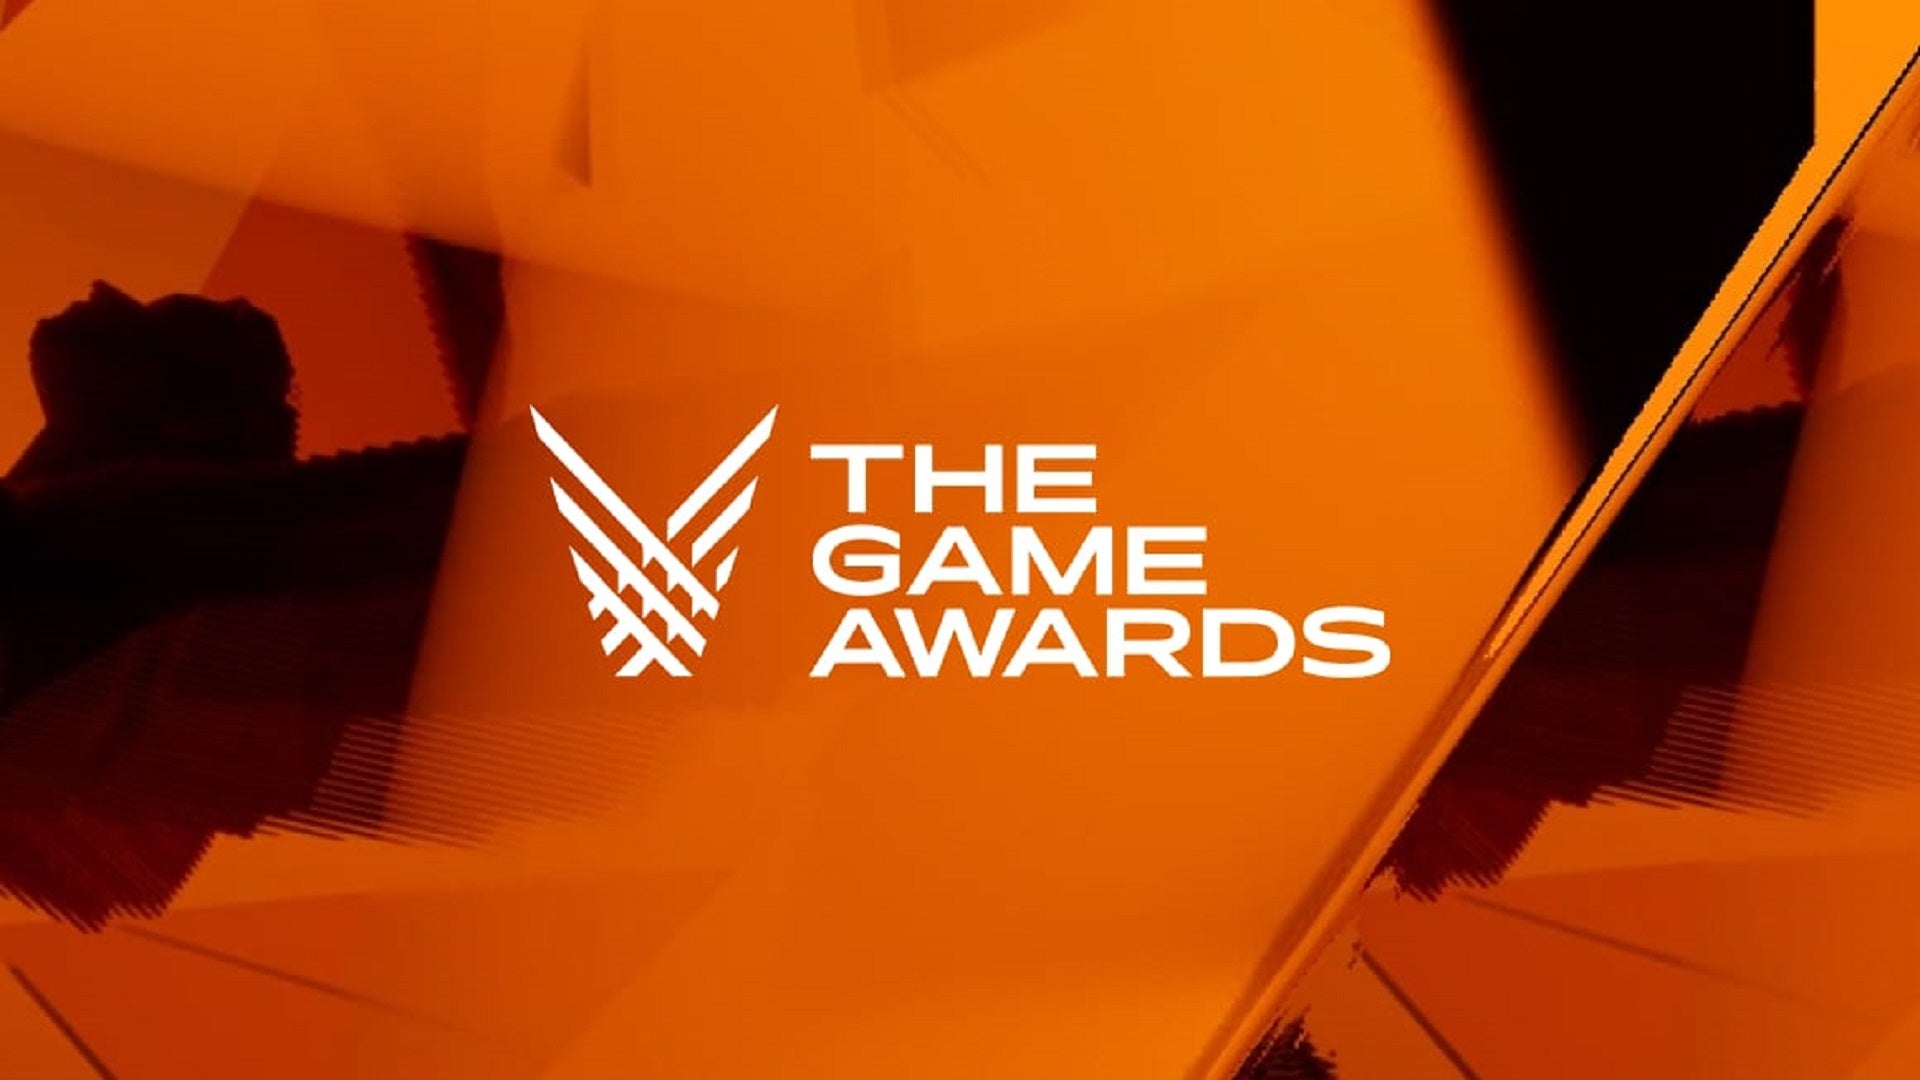 The logo for The Game Awards against an abstract orange background.